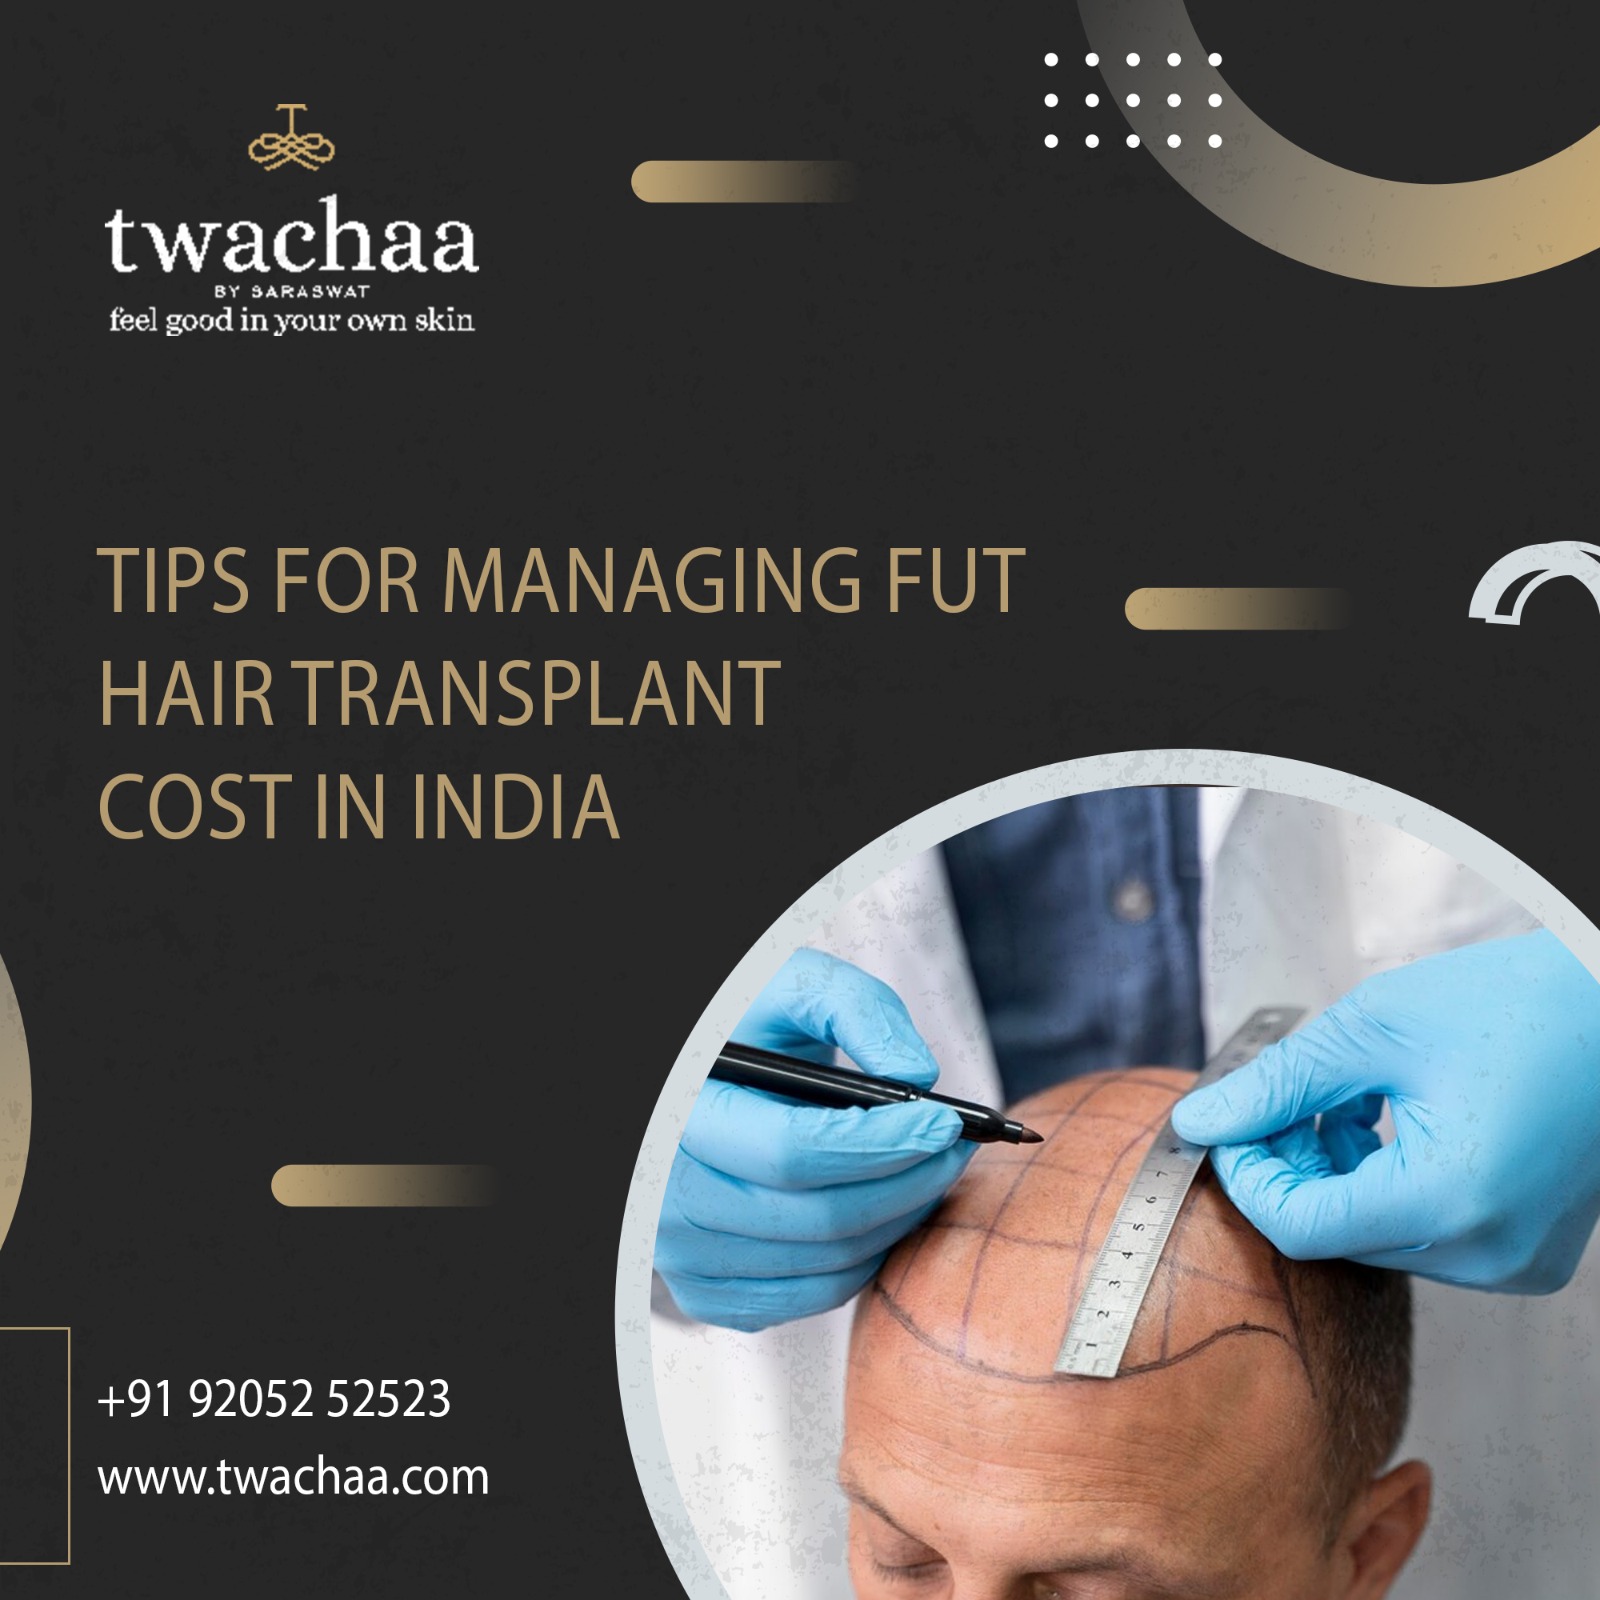 Non-shaven hair transplant clinics in India